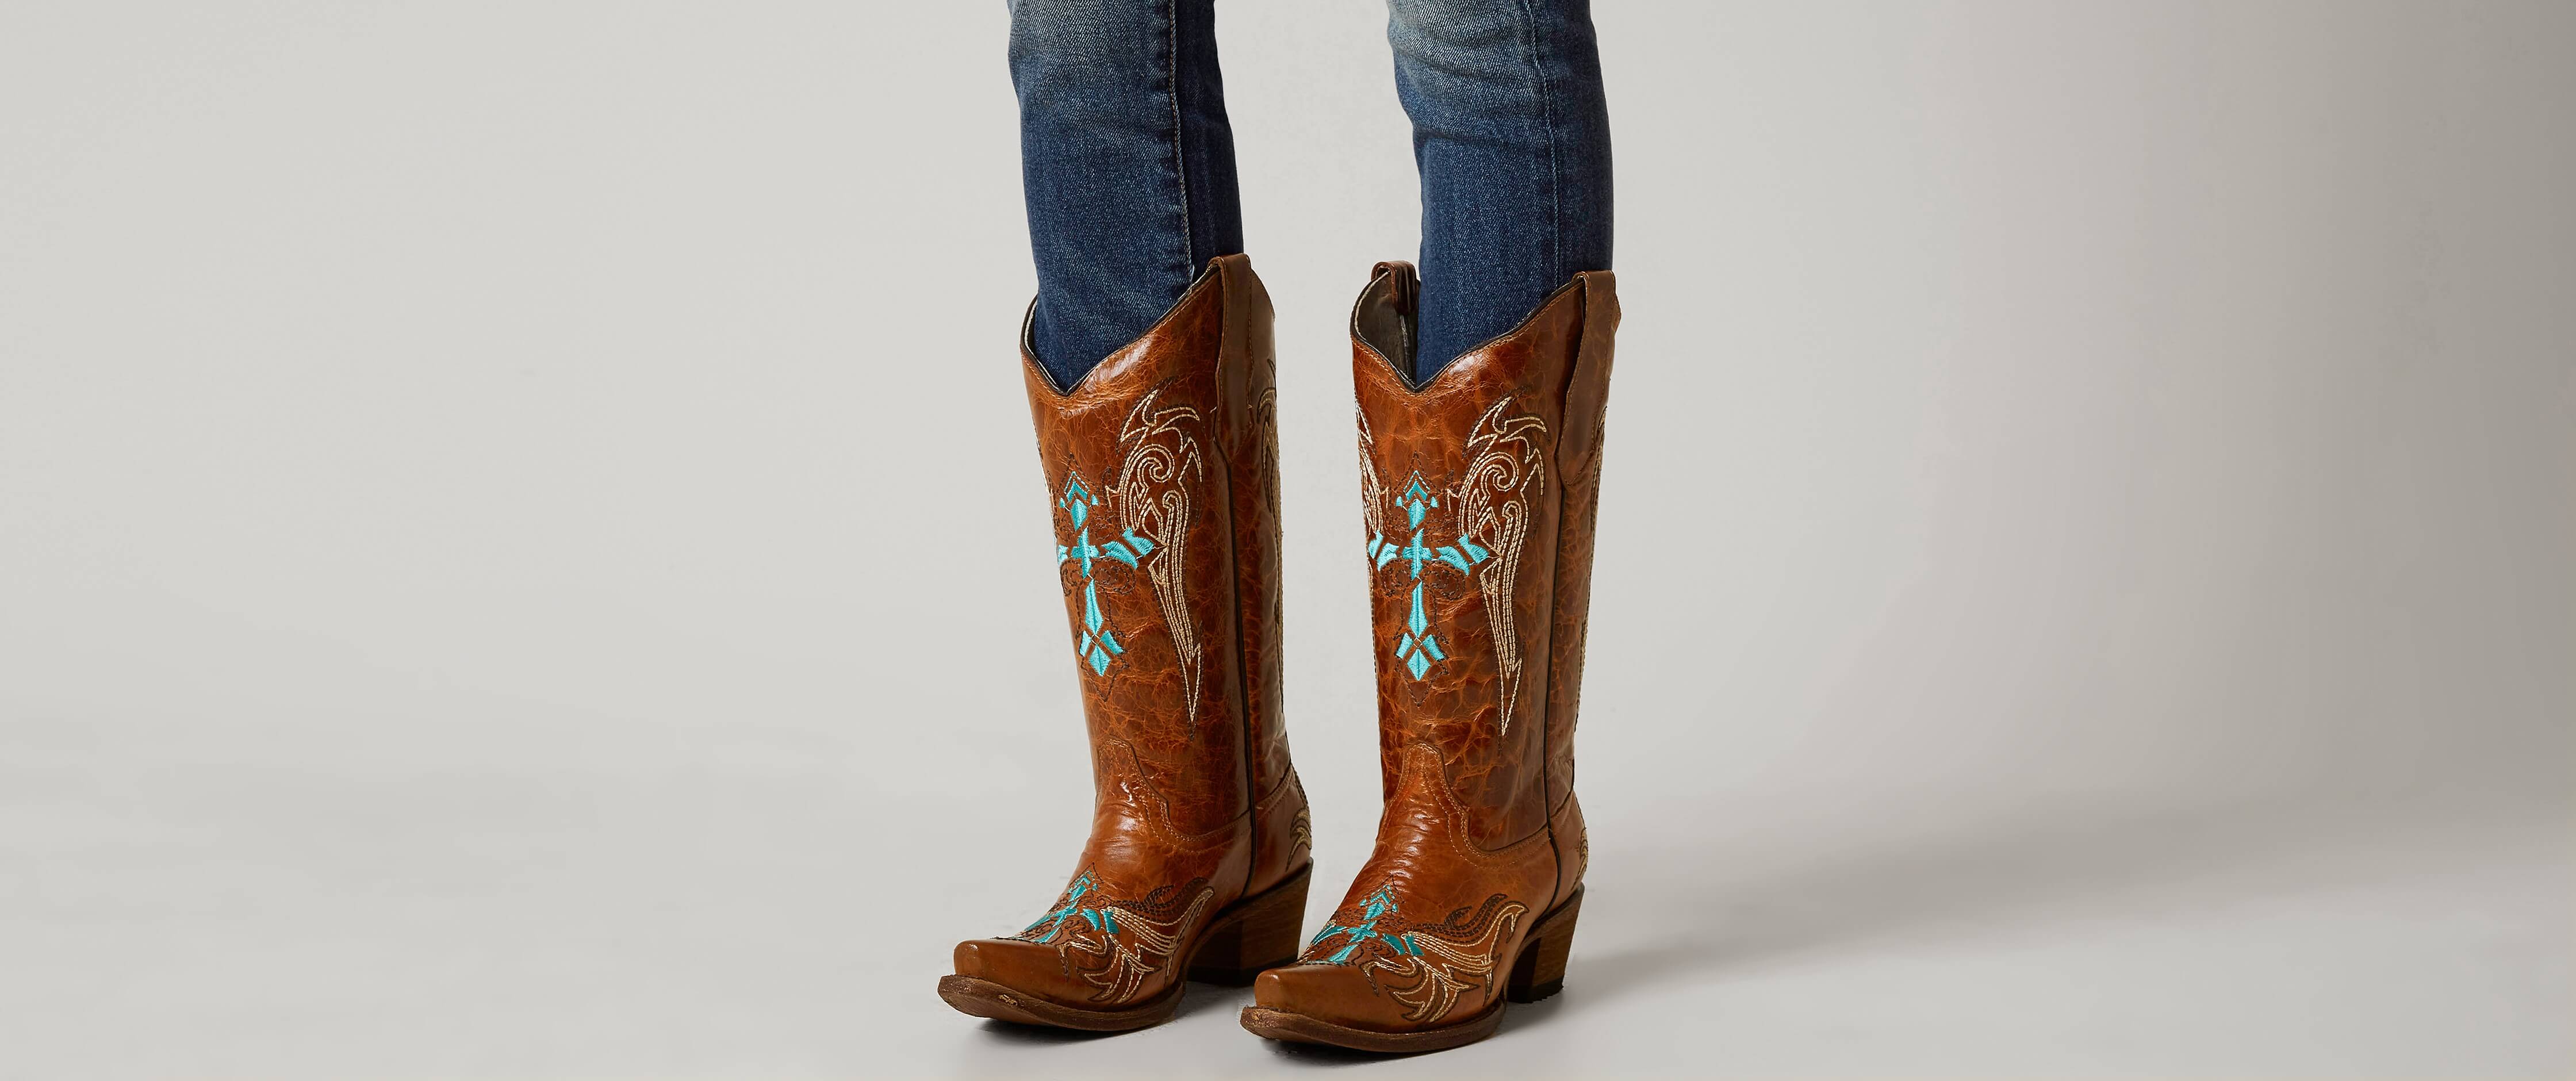 corral embroidered cowboy boot